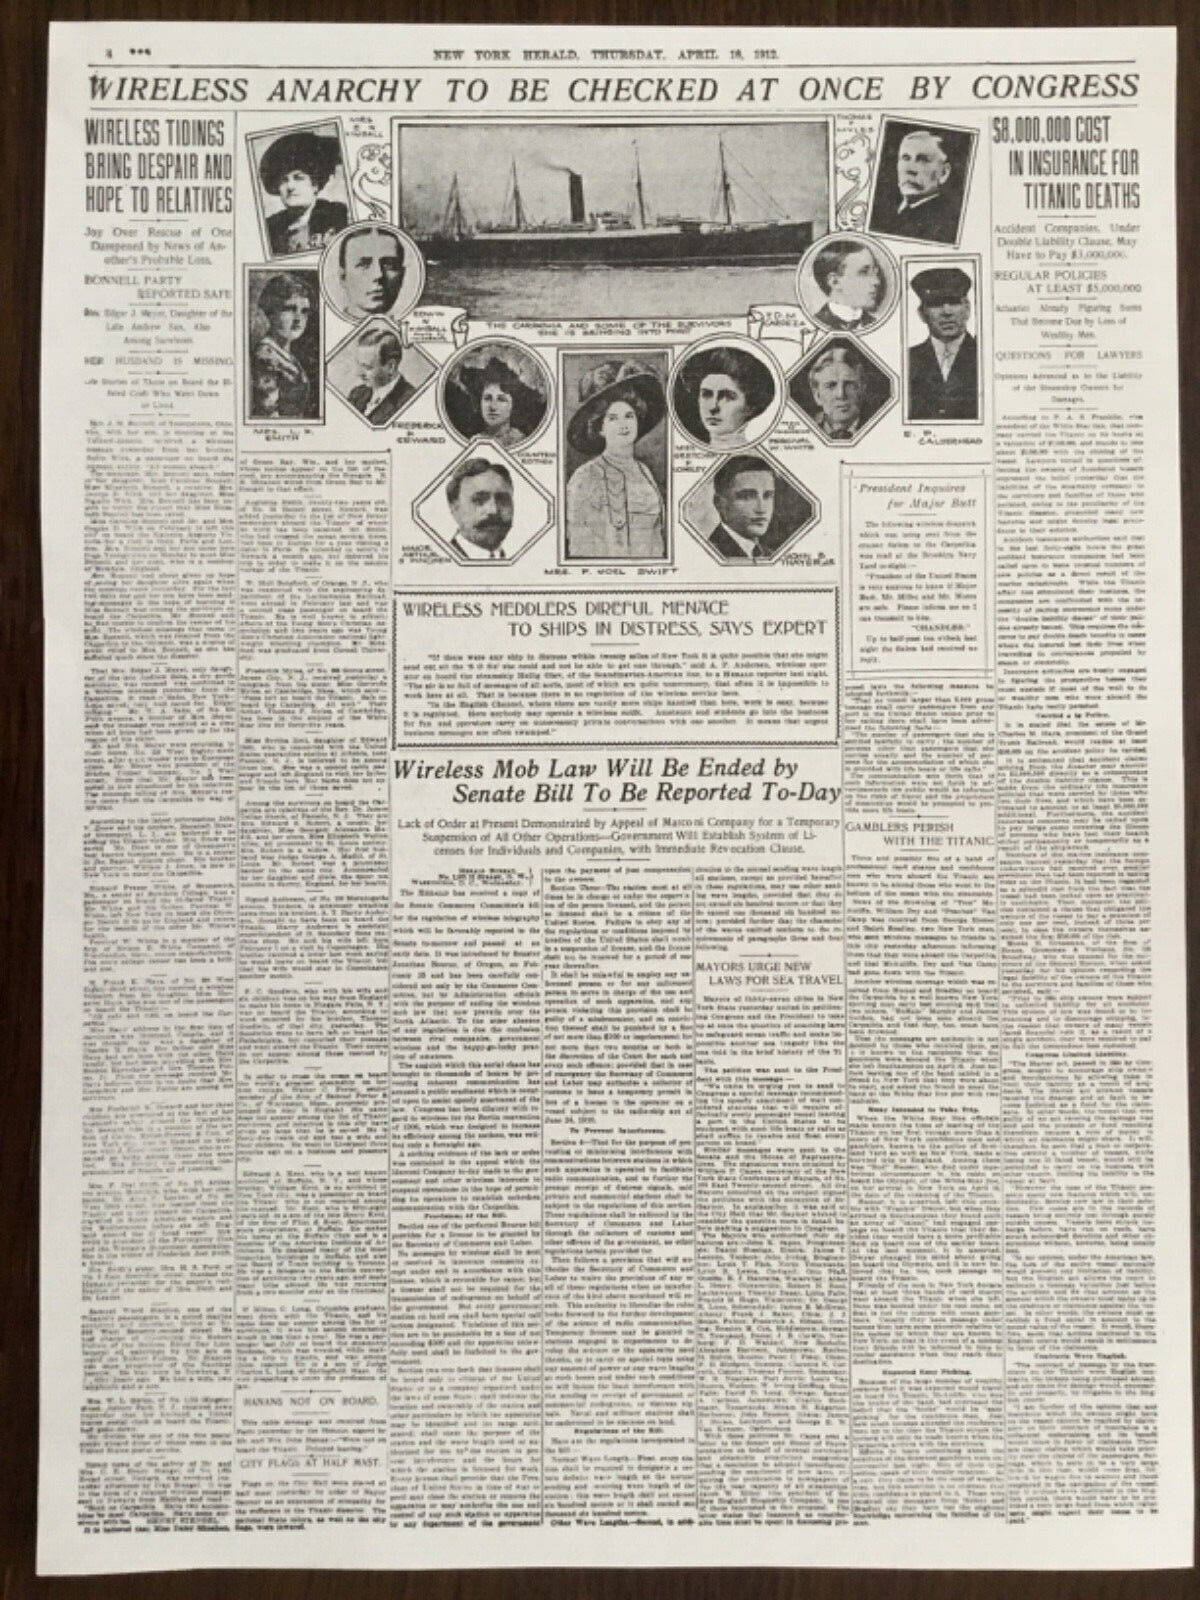 TITANIC DISASTER 18TH APRIL1912 NEWSPAPER/POSTER 1 PAGE/2 SIDES, NEW YORK HERALD